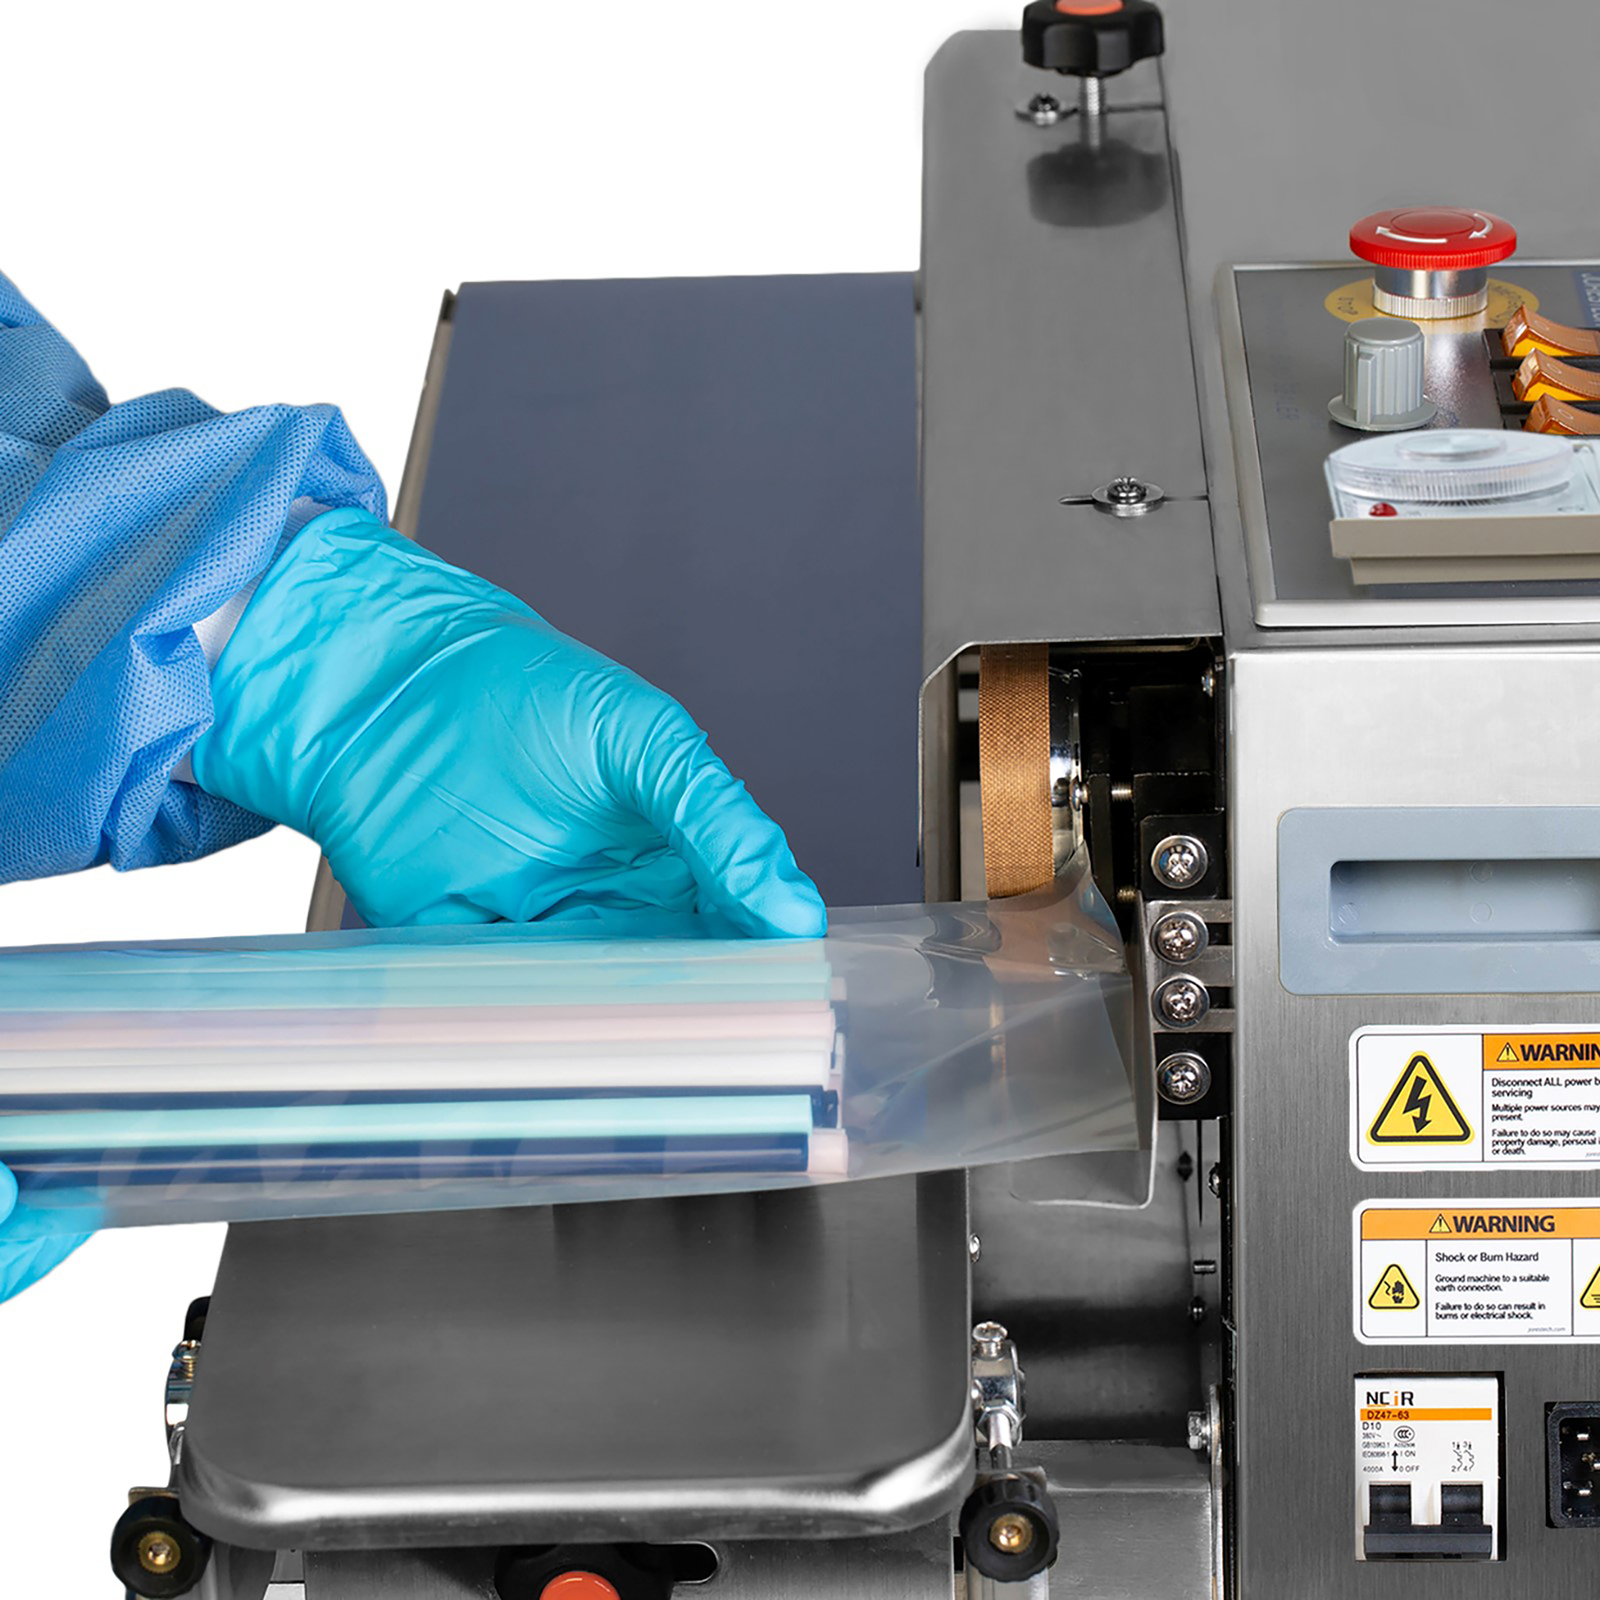 A person wearing disposable gloves and clothe using the JORES TECHNOLOGIES® band sealer to seal a clear plastic bag filled with straws. The machine is set in an Horizontal position while the bag moves laying on the revolving band.